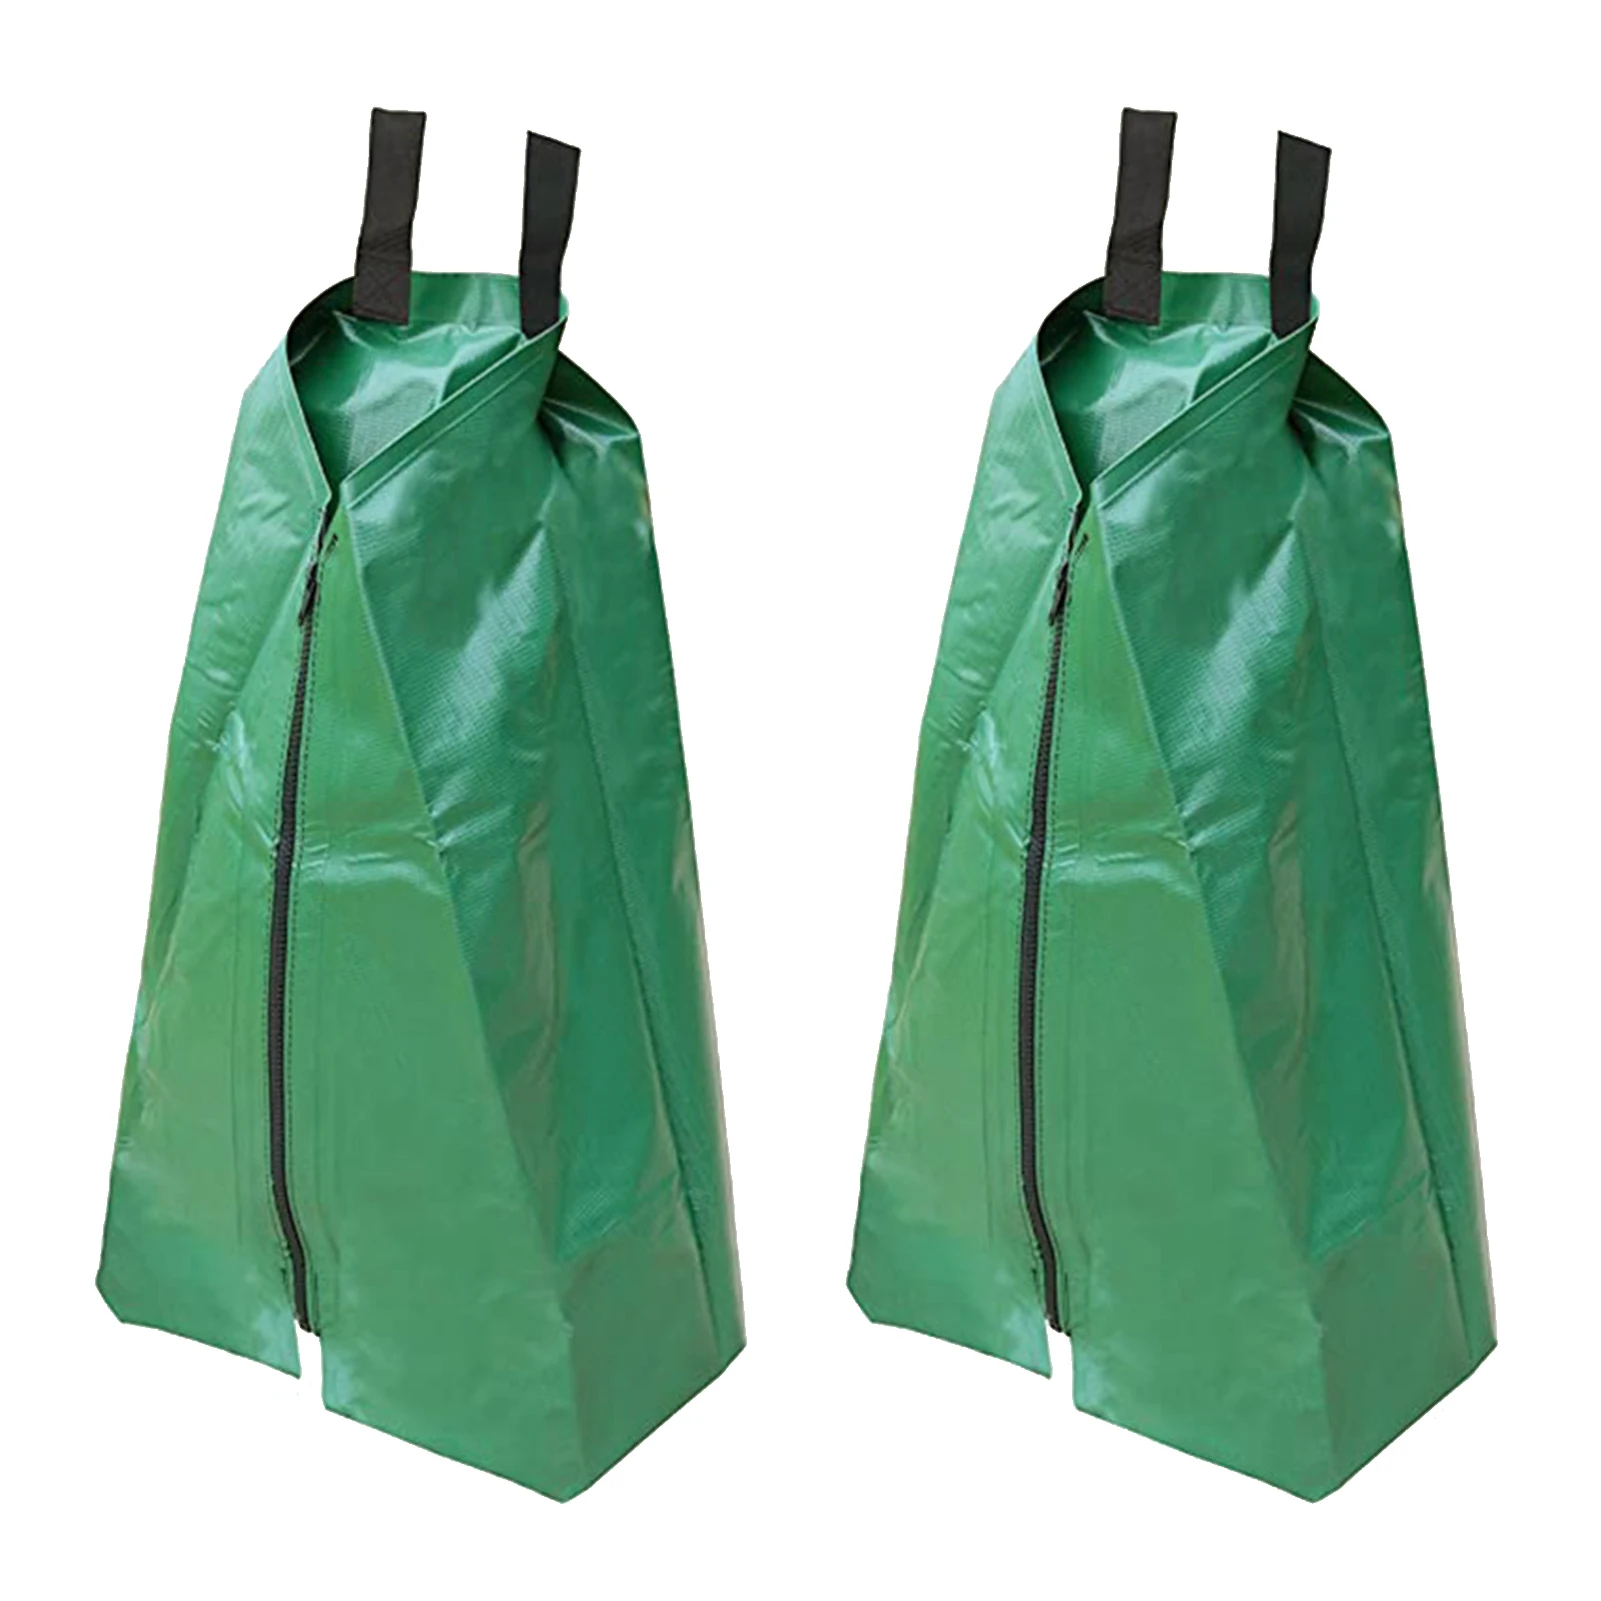 2pcs Shrub Slow Release Tree Watering Bag Automatic UV Stable PVC Gardening Tool 20 Gallon Continuous Drip Plants Large Green